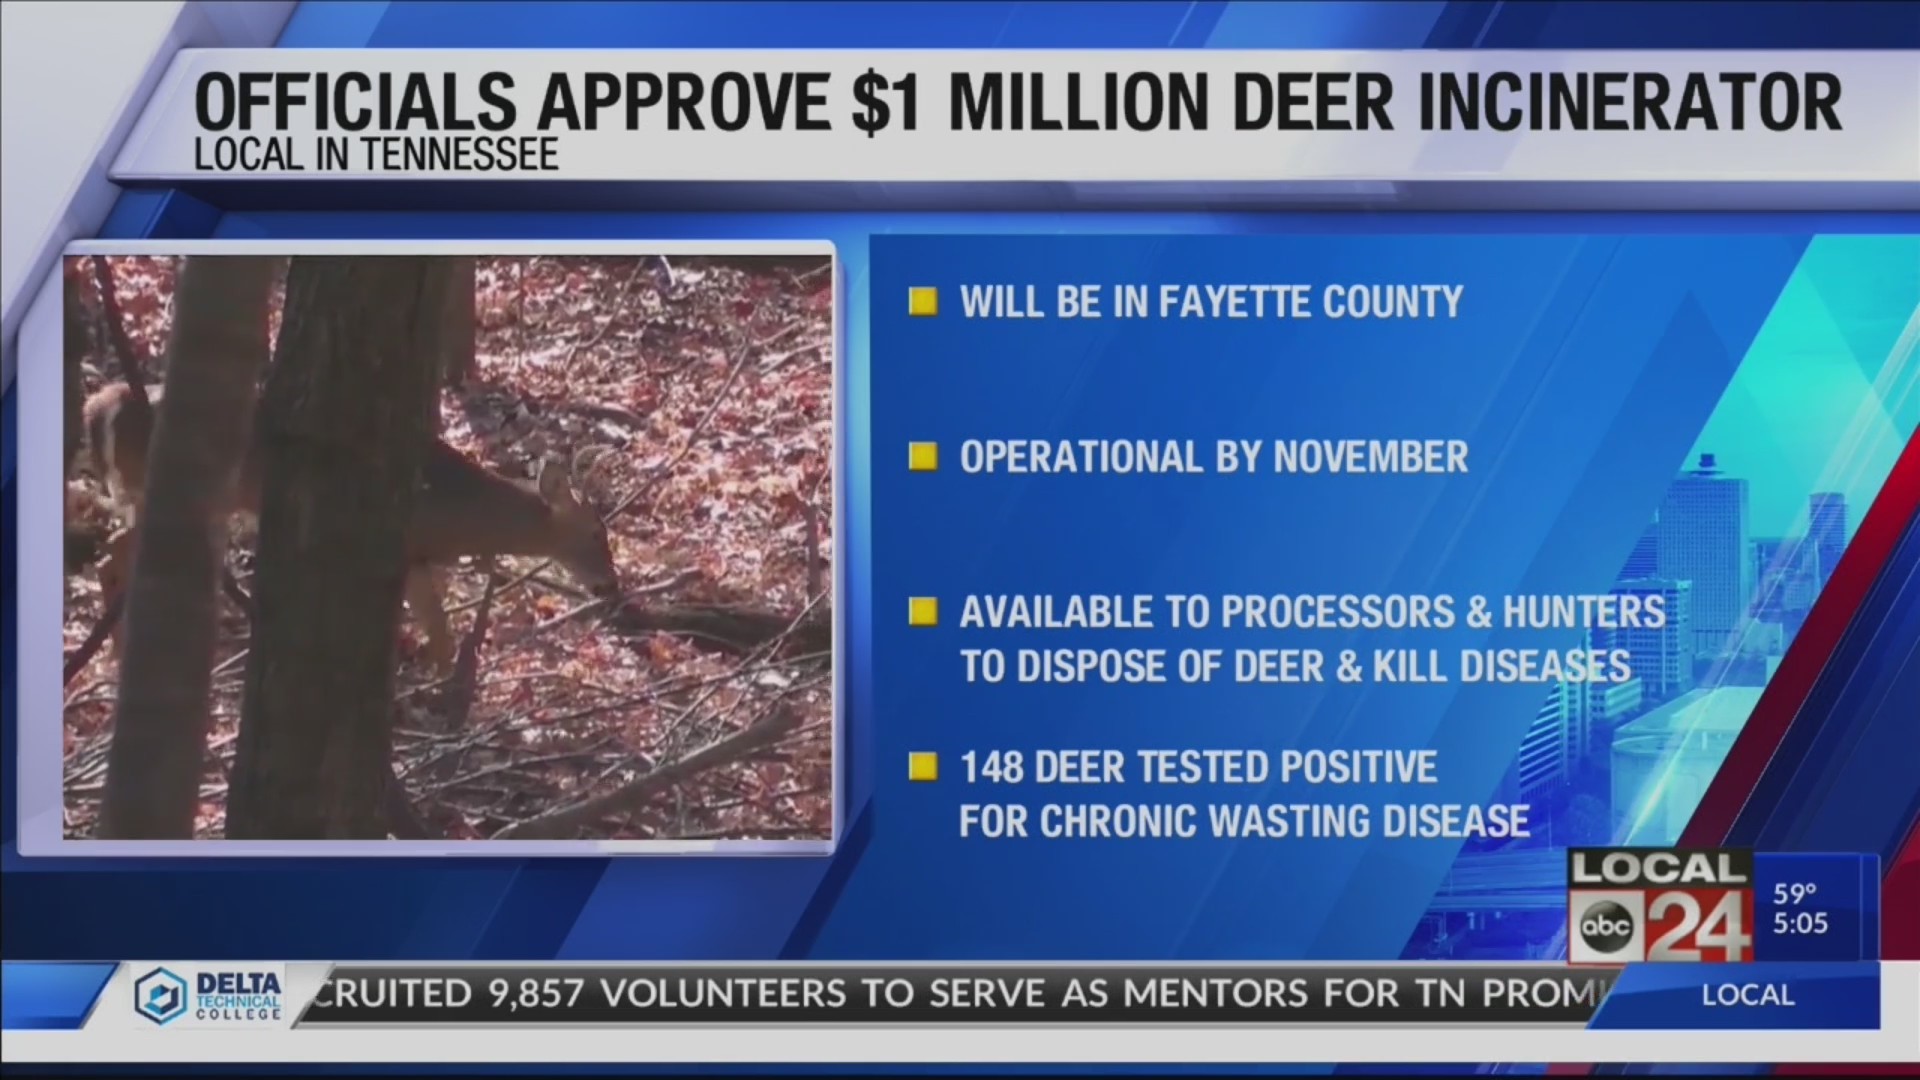 Tennessee targets deer disease with $1M carcass incinerator